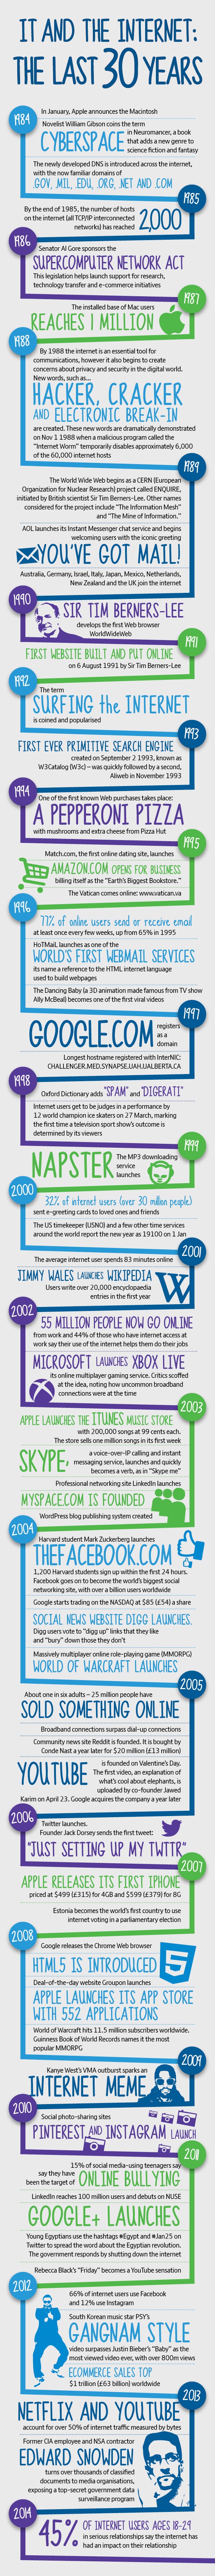 IT And The Internet: The Last 30 Years